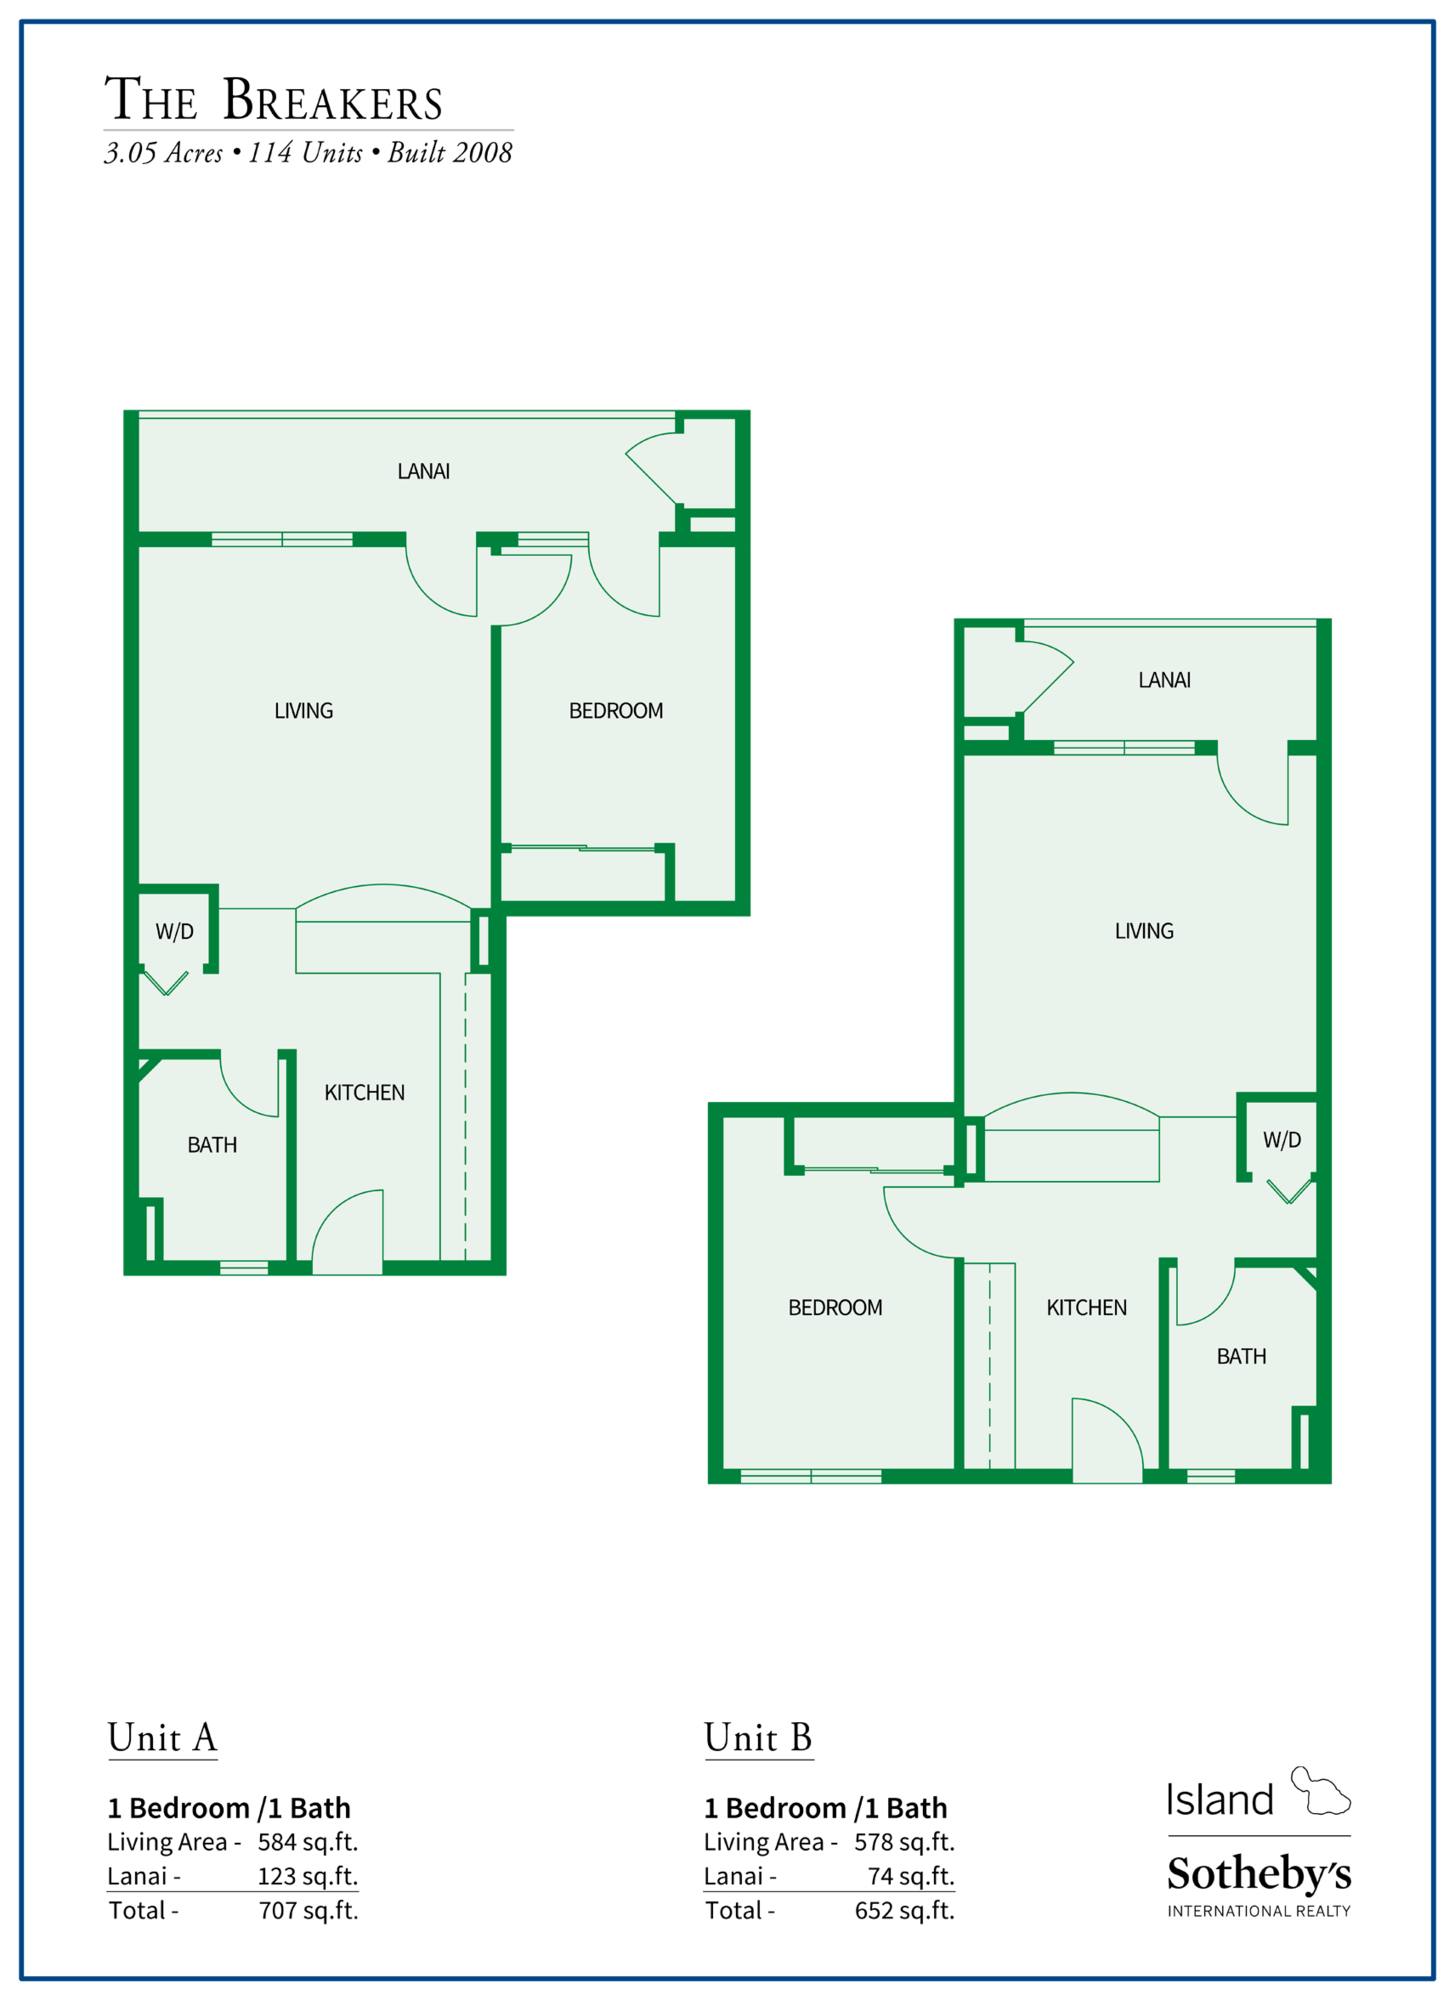 The Breakers Maui Floor Plan A and B